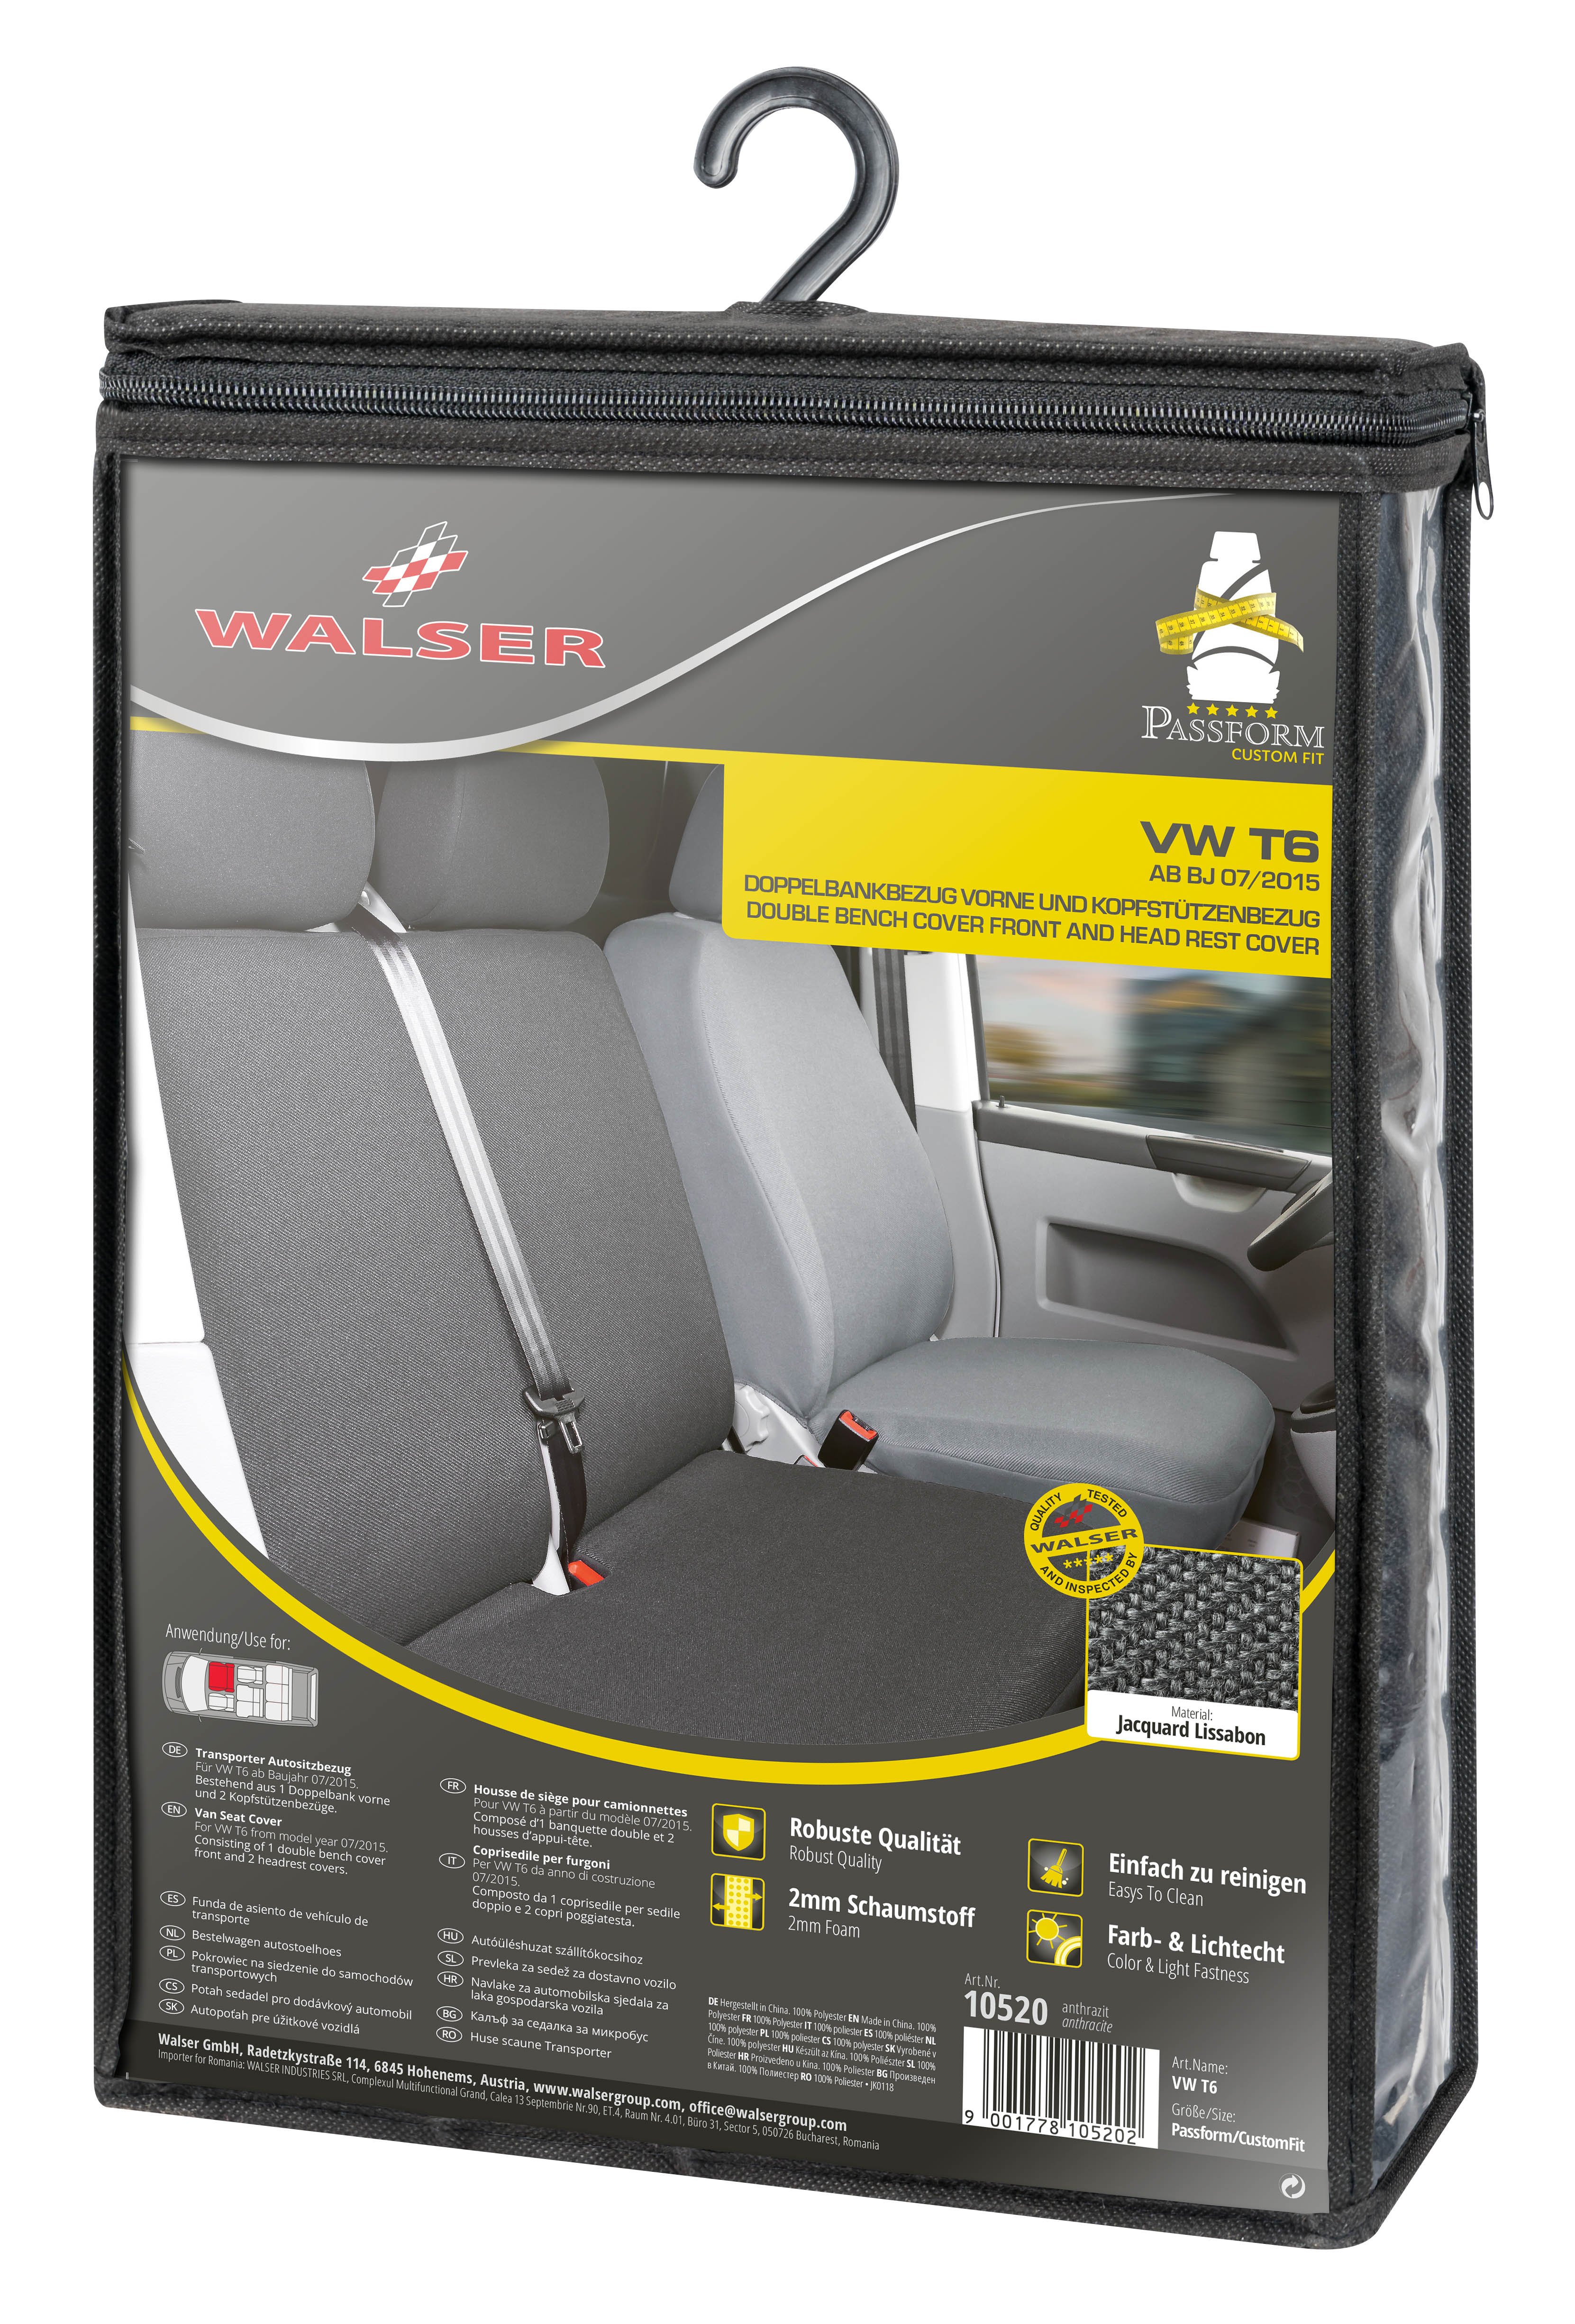 Seat cover made of fabric for VW T6, double bench cover front